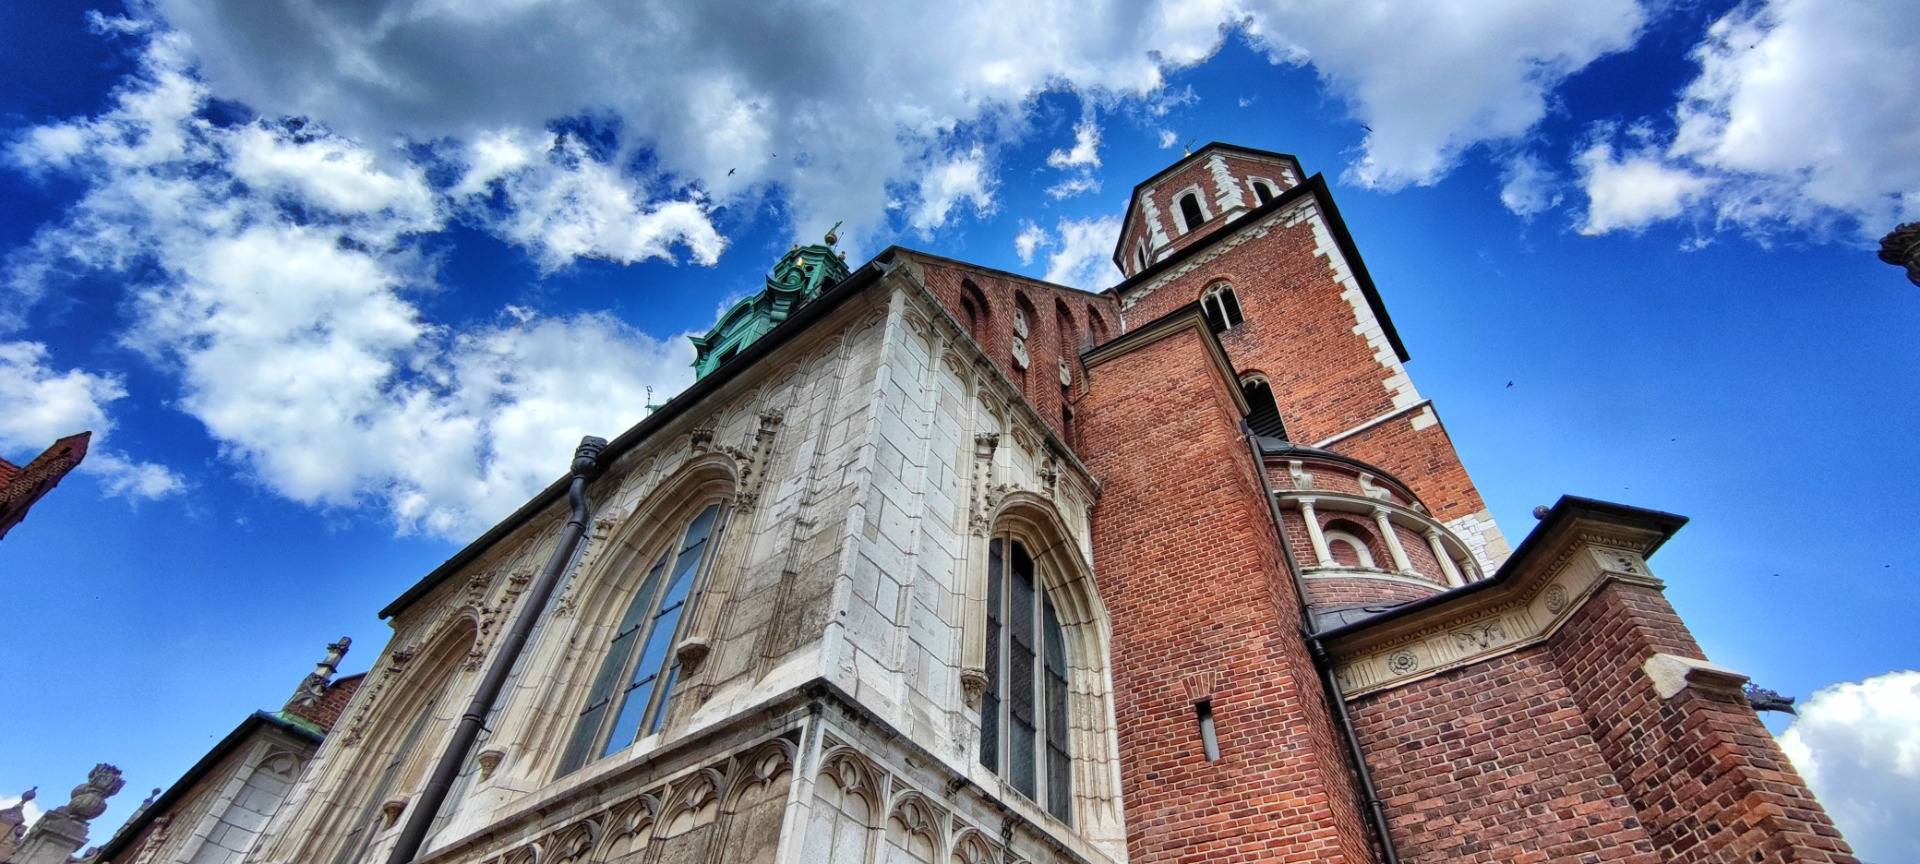 One of the magnificent churches of Krakow